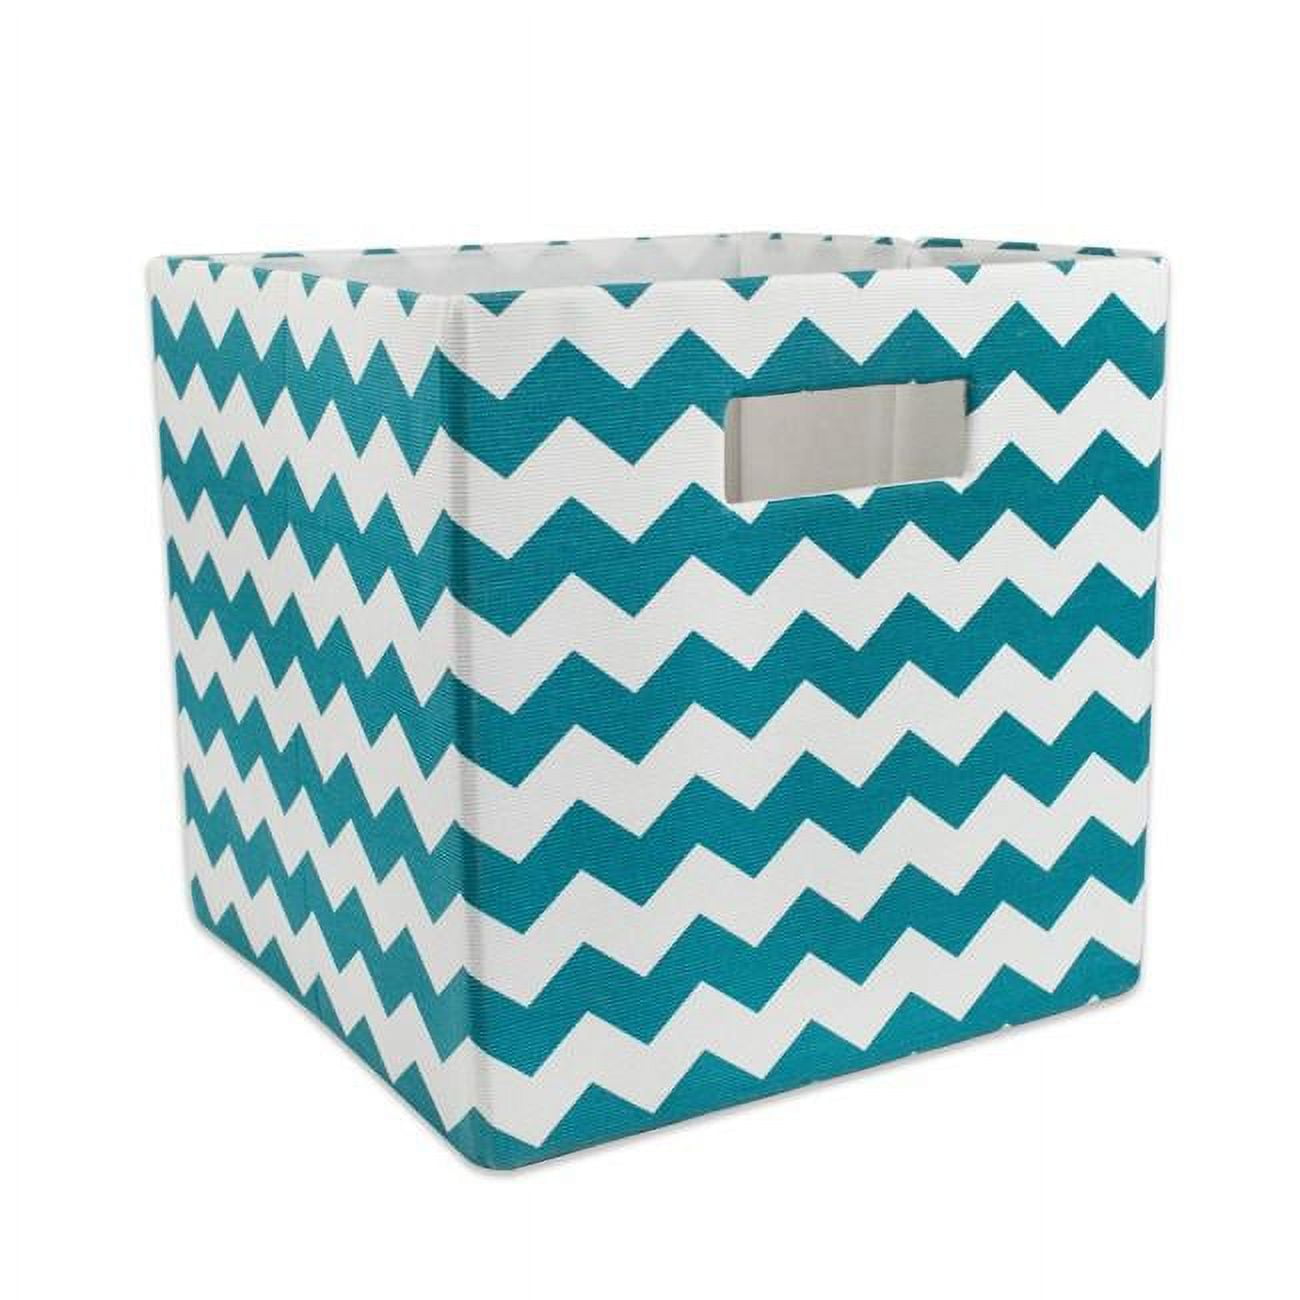 Design Imports Camz37949 13 X 13 X 13 In. Chevron Square Polyester Storage Cube, Teal